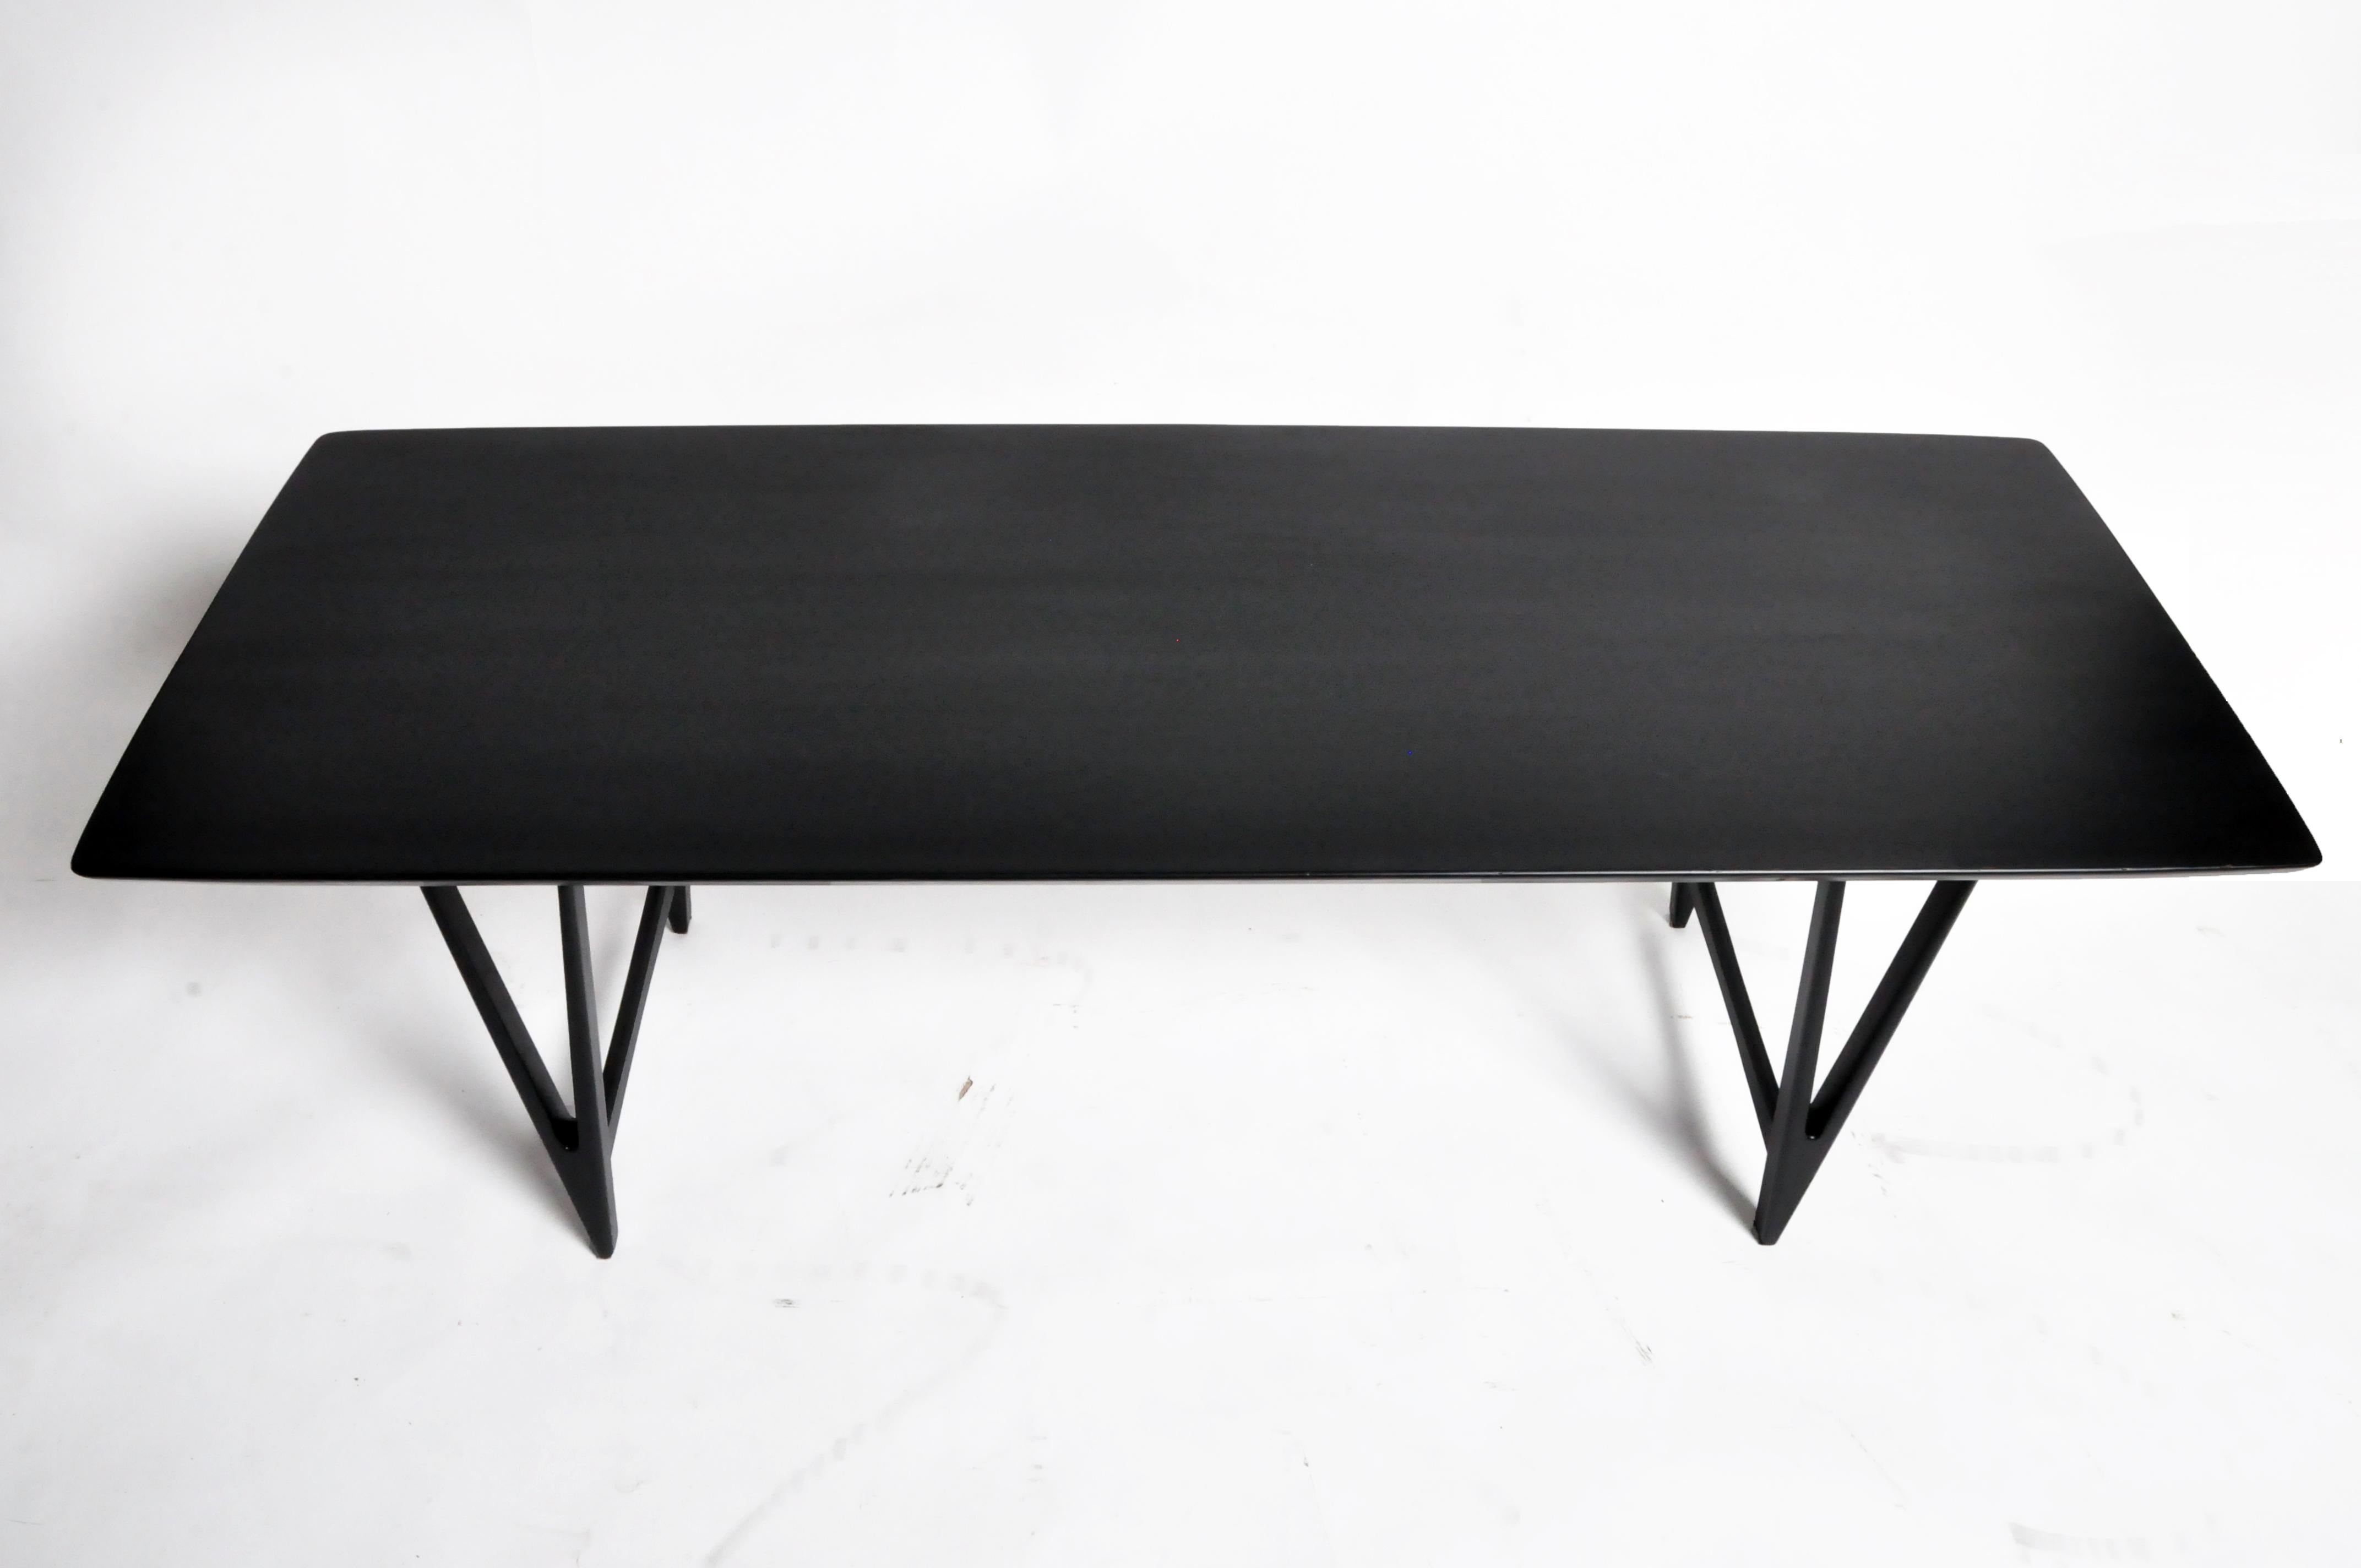 20th Century Mid-Century Coffee Table For Sale